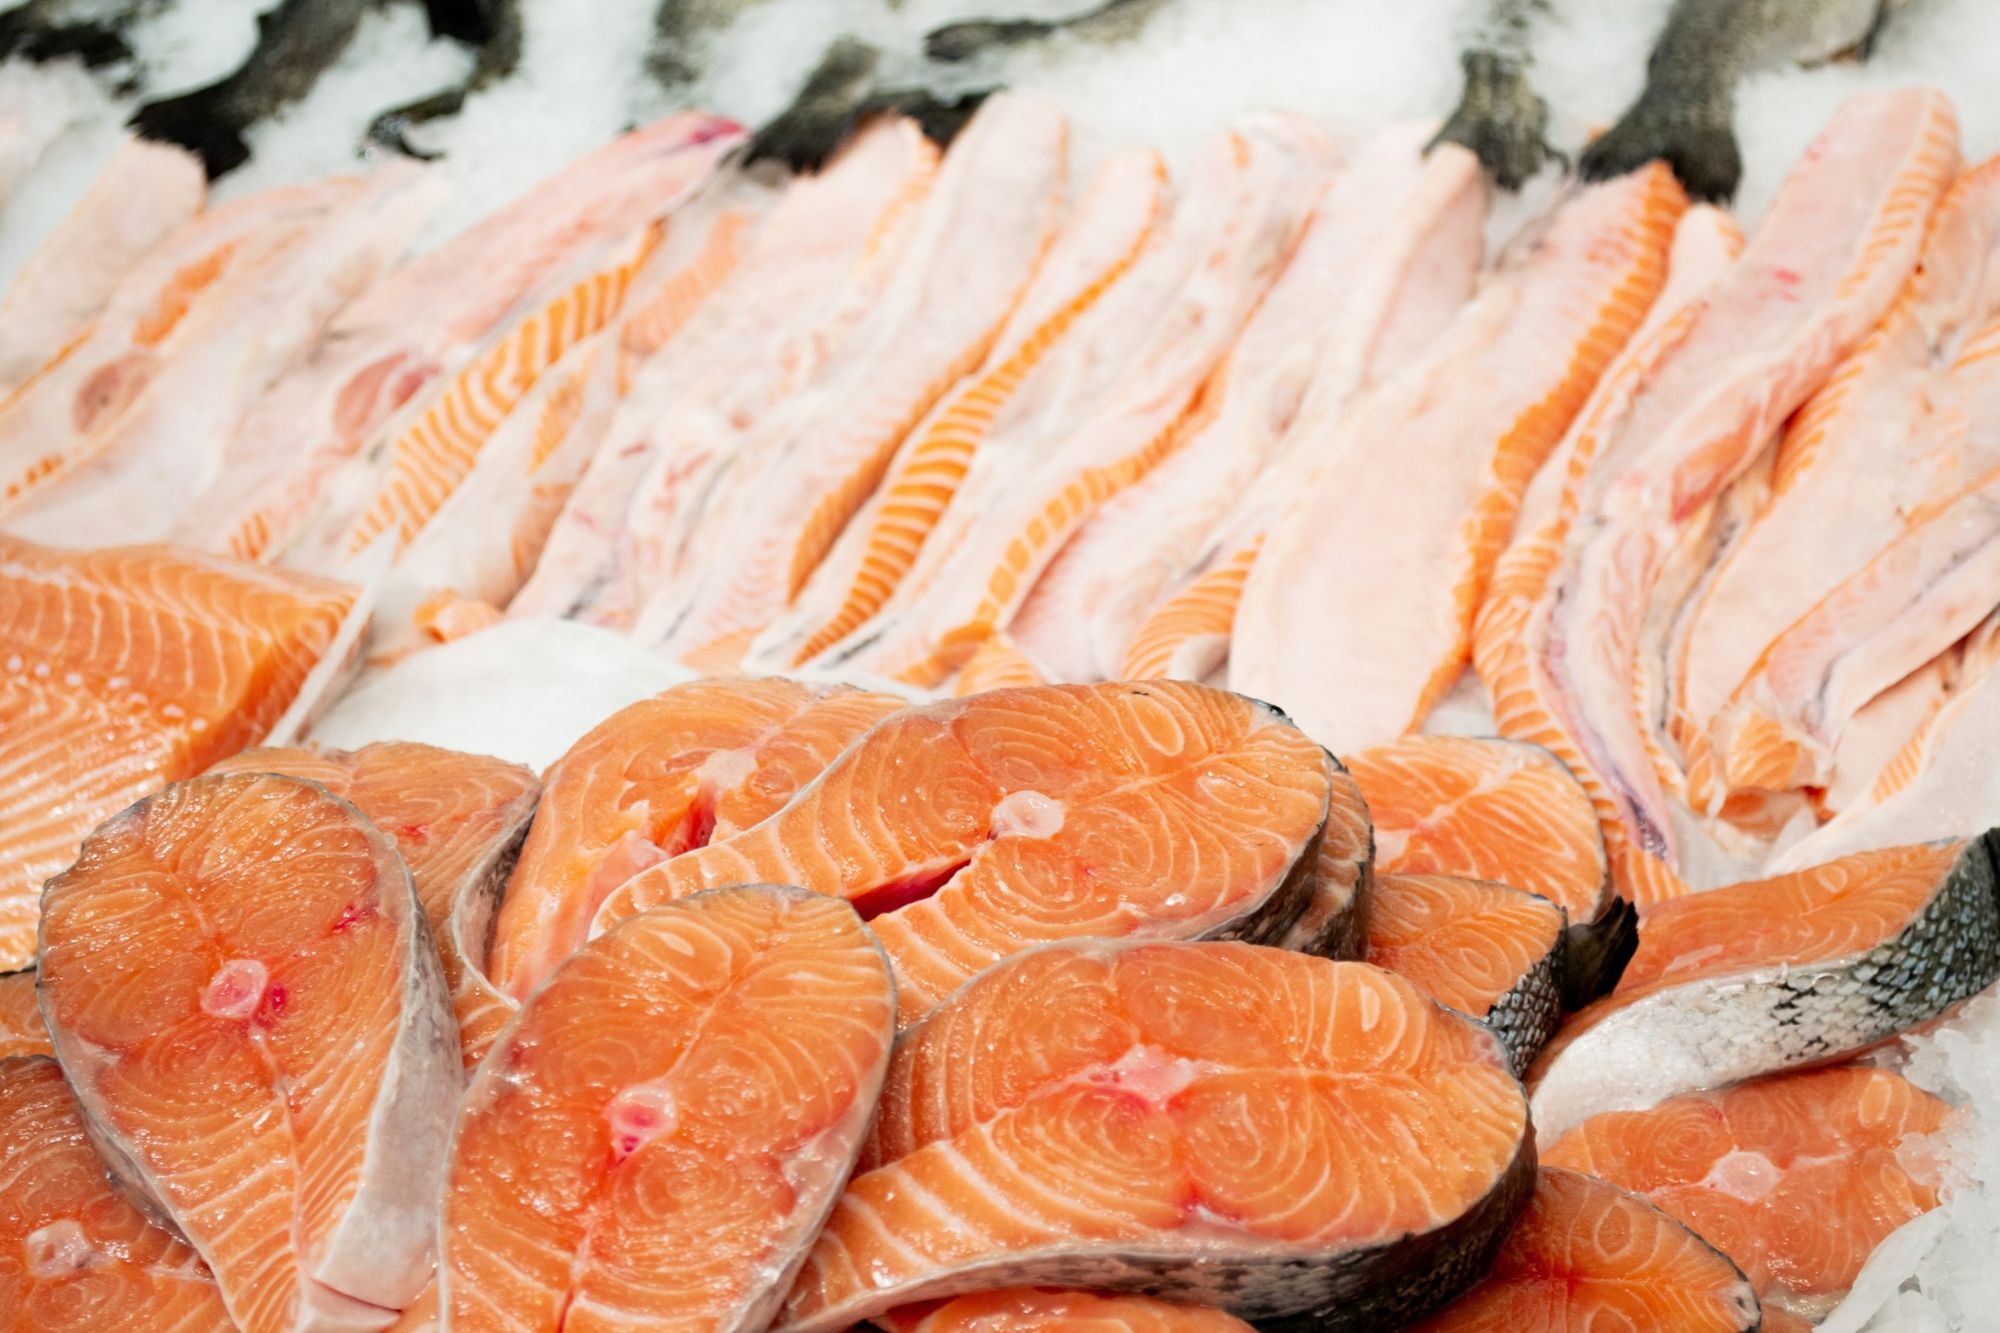 🐠Norwegian Salmon Farmers to Pay $85 Million Settlement in Price-Fixing Lawsuit